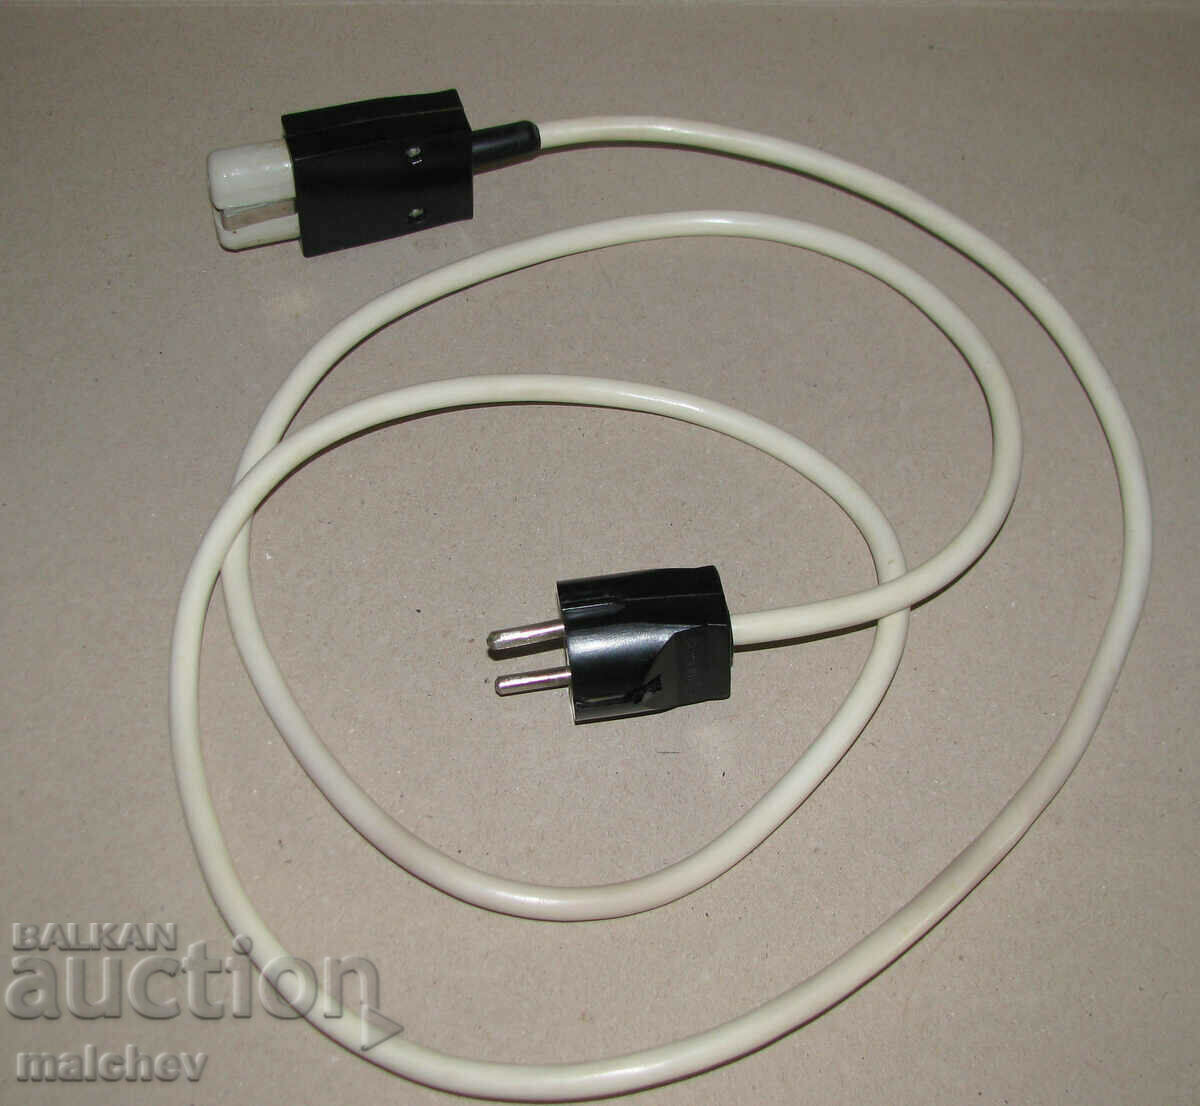 Extension cable 1.8 m with plug, for hot pepper stoves, preserved